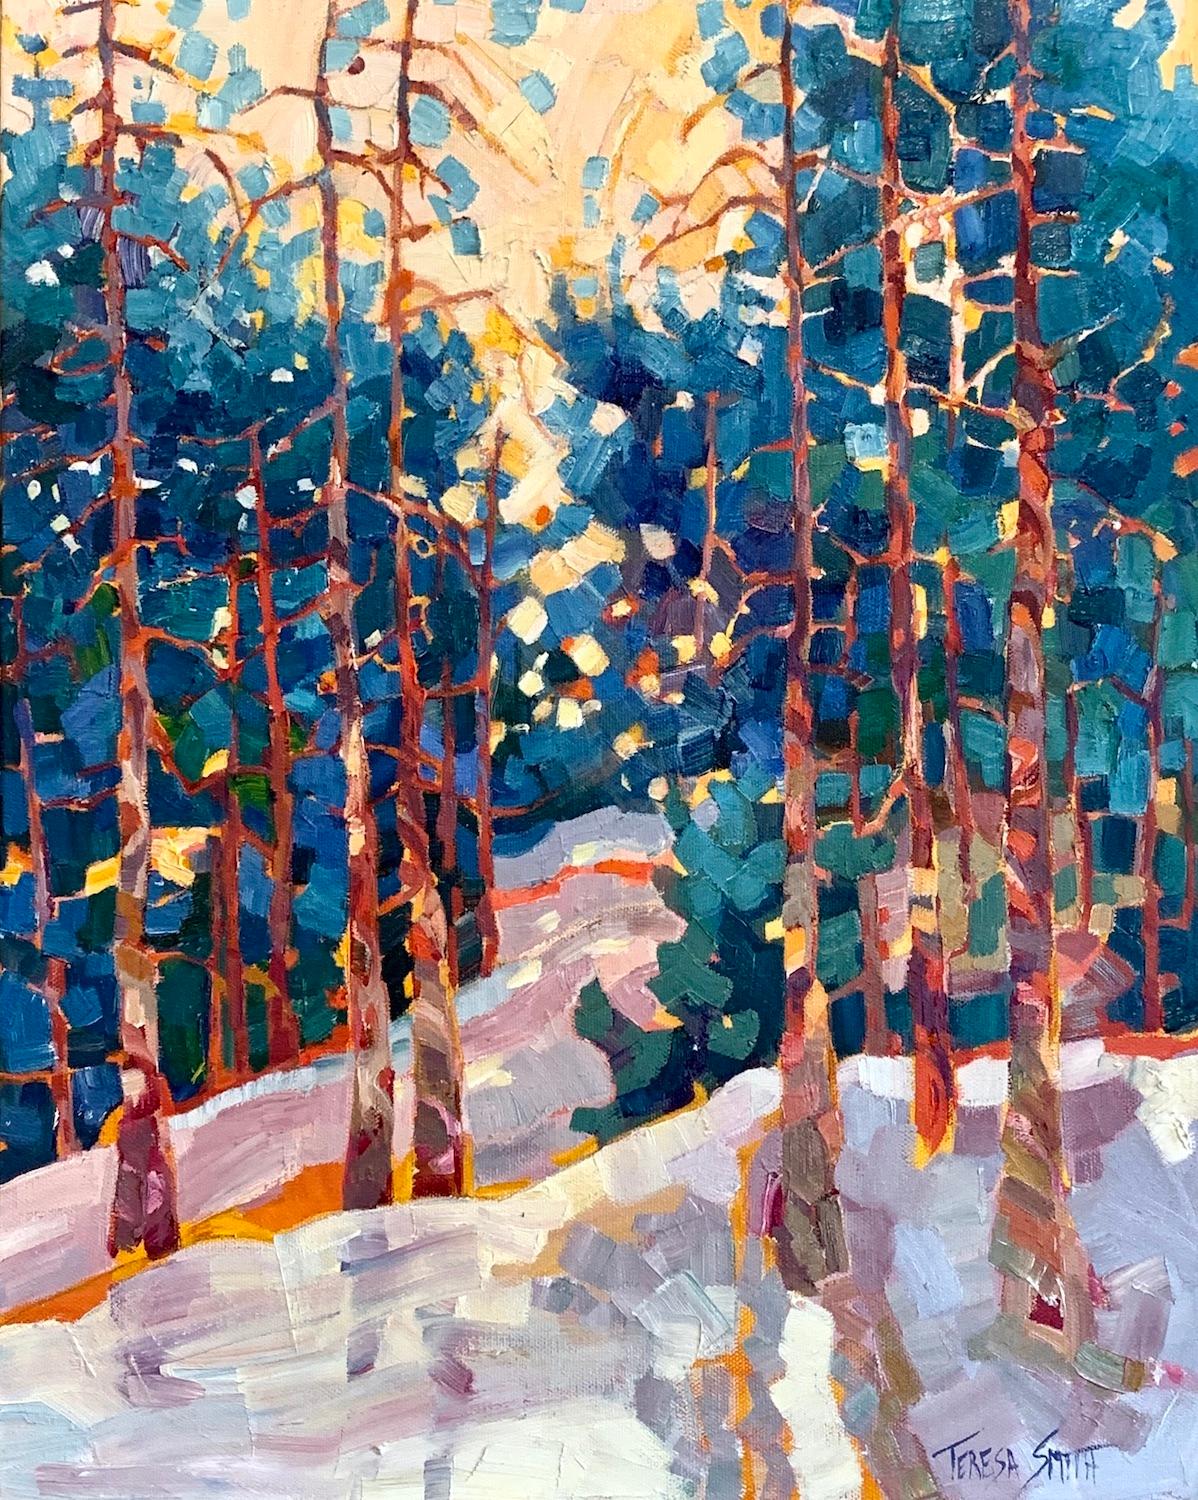 Teresa Smith Landscape Painting - Snow Day, Oil Painting